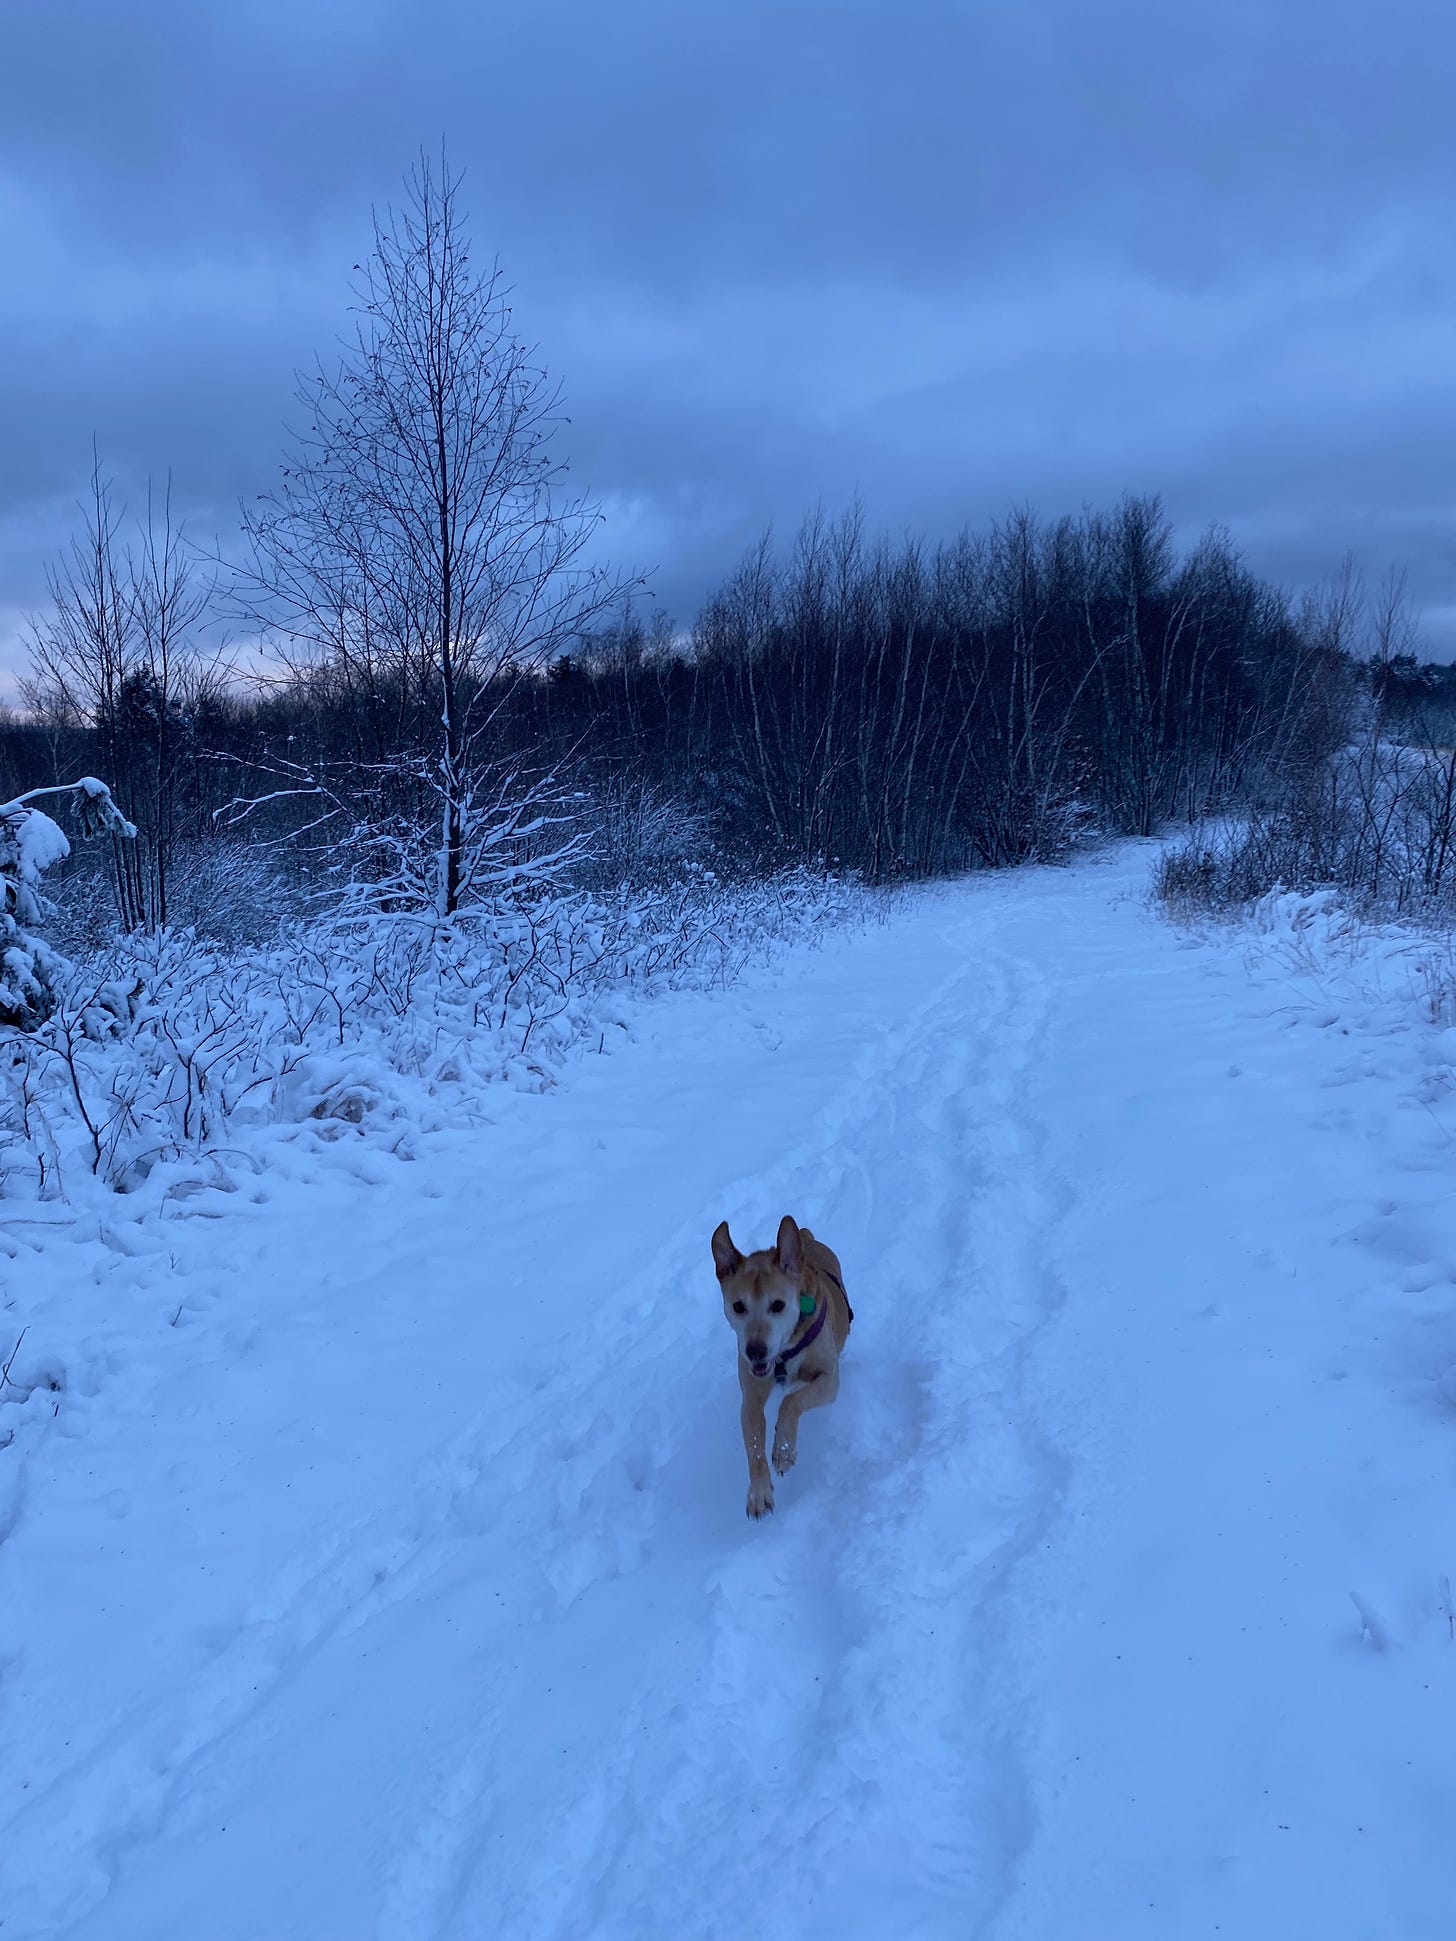 Nessa bounding along a snowy path on a grey, snowy day, ears flapping and legs extended.